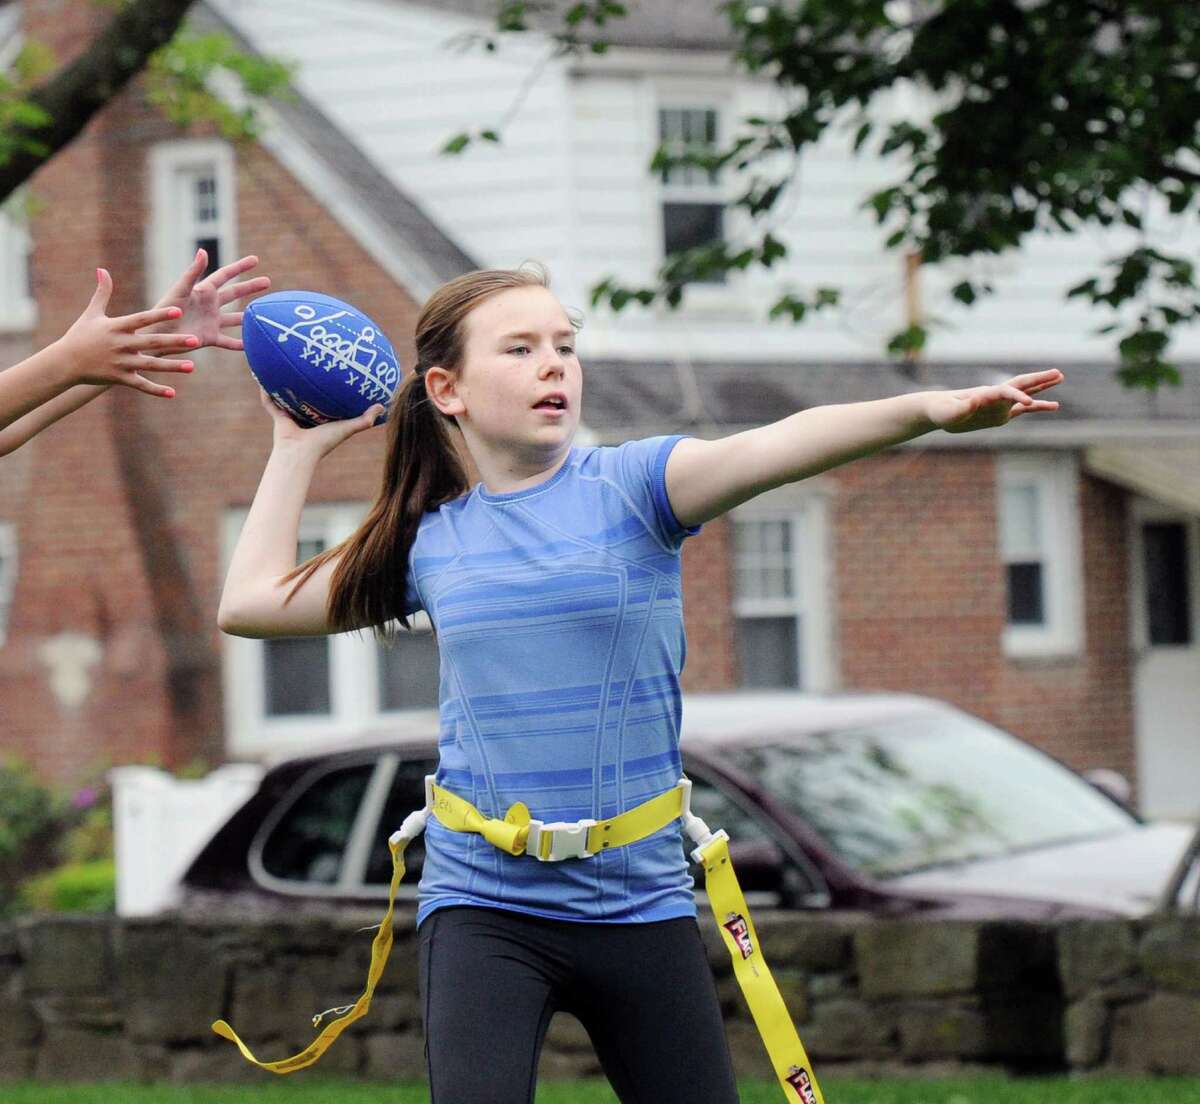 Erin Morlock, 12, plays quarterback during the Chargers flag football practice at Pemberwick Park in the Pemberwick section of Greenwich, Conn., Saturday, May 21, 2016. Charger coaches Tim Harkness and Jim Morlock, said the team is part of the Greenwich Flag Football League that plays their games at Greenwich High School against other teams from the area.